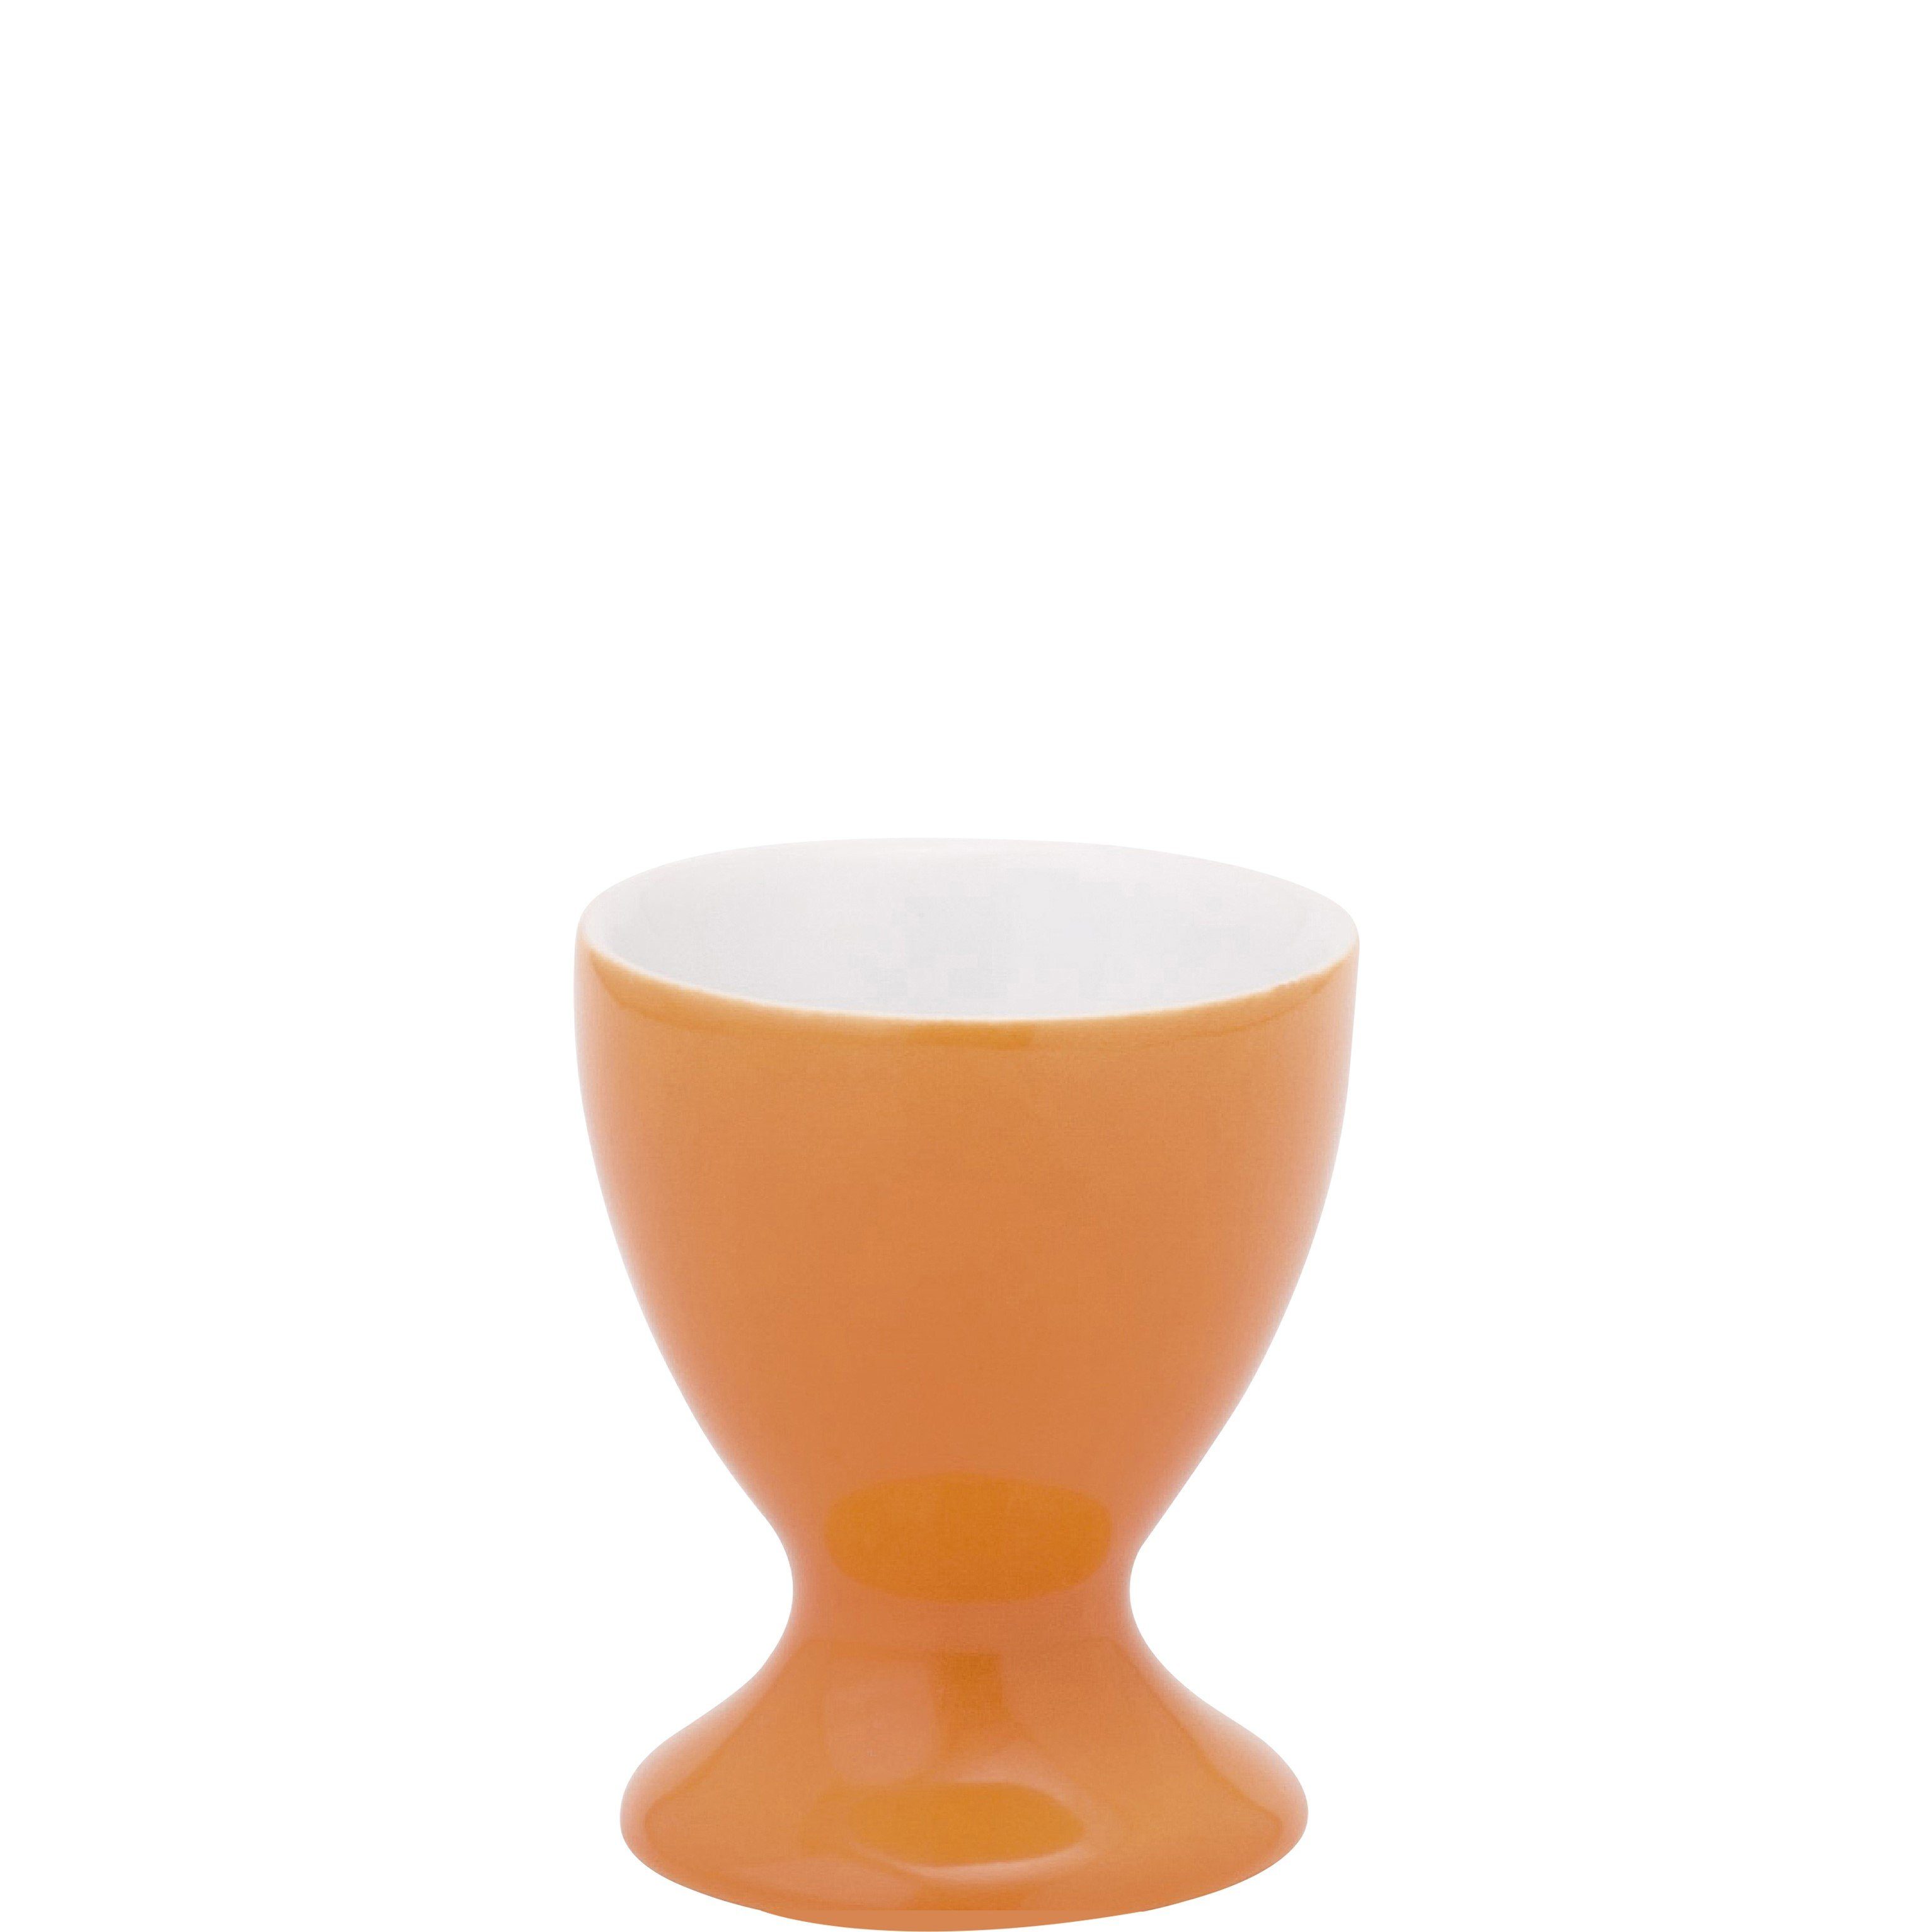 Kahla Eierbecher mit Fuß, Pronto Colore, Made in Germany sunset orange